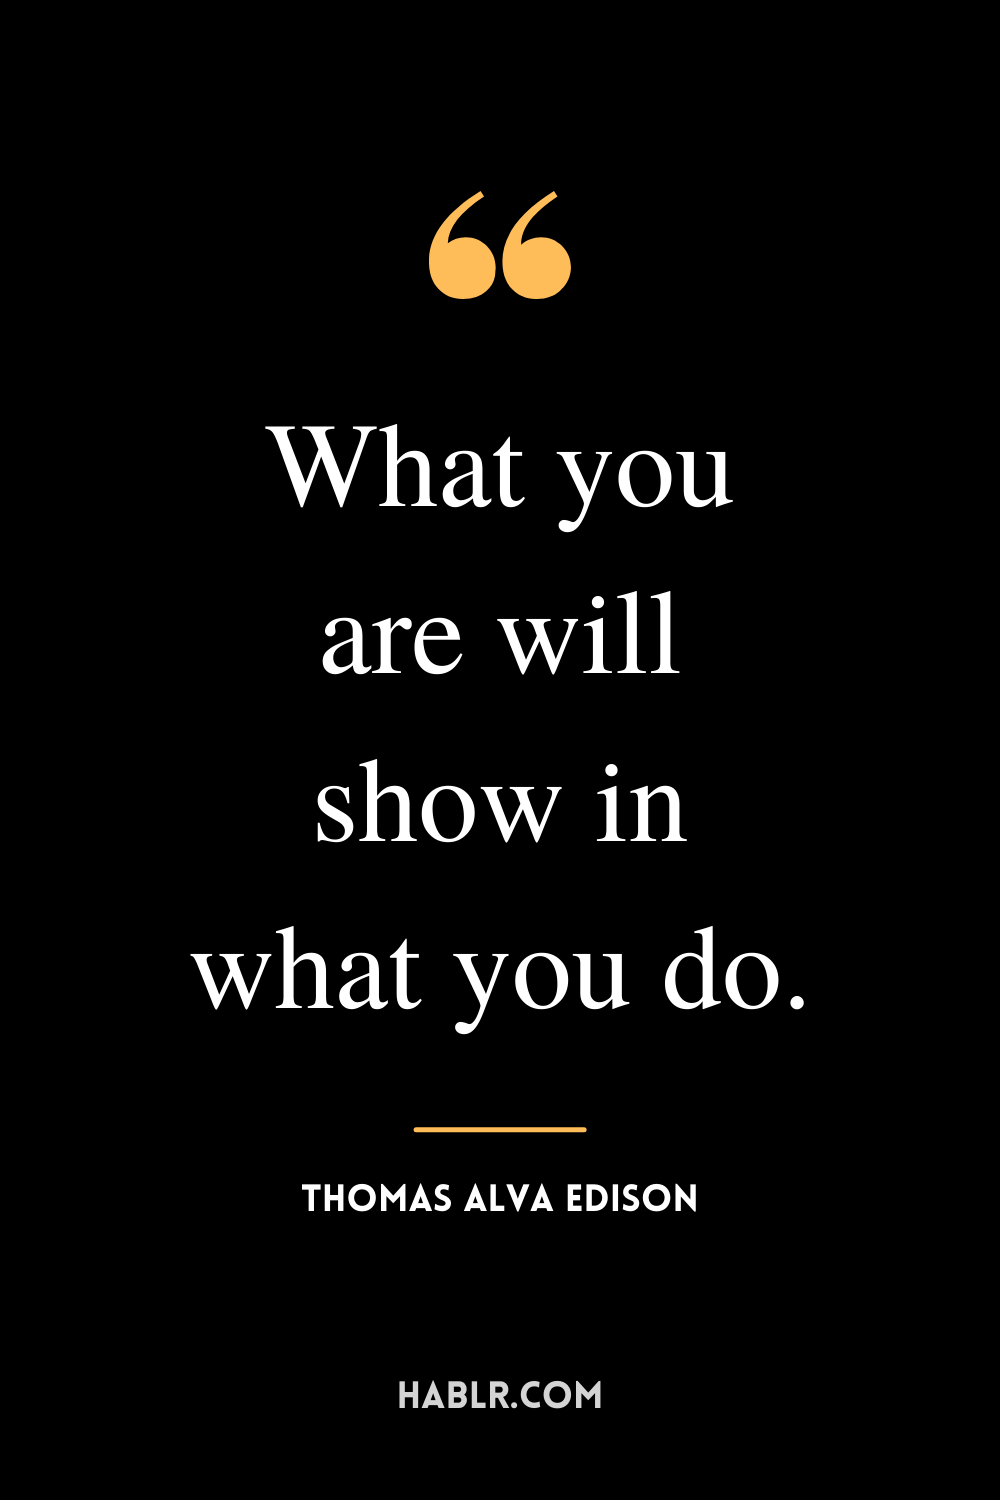 “What you are will show in what you do.” -Thomas Alva Edison